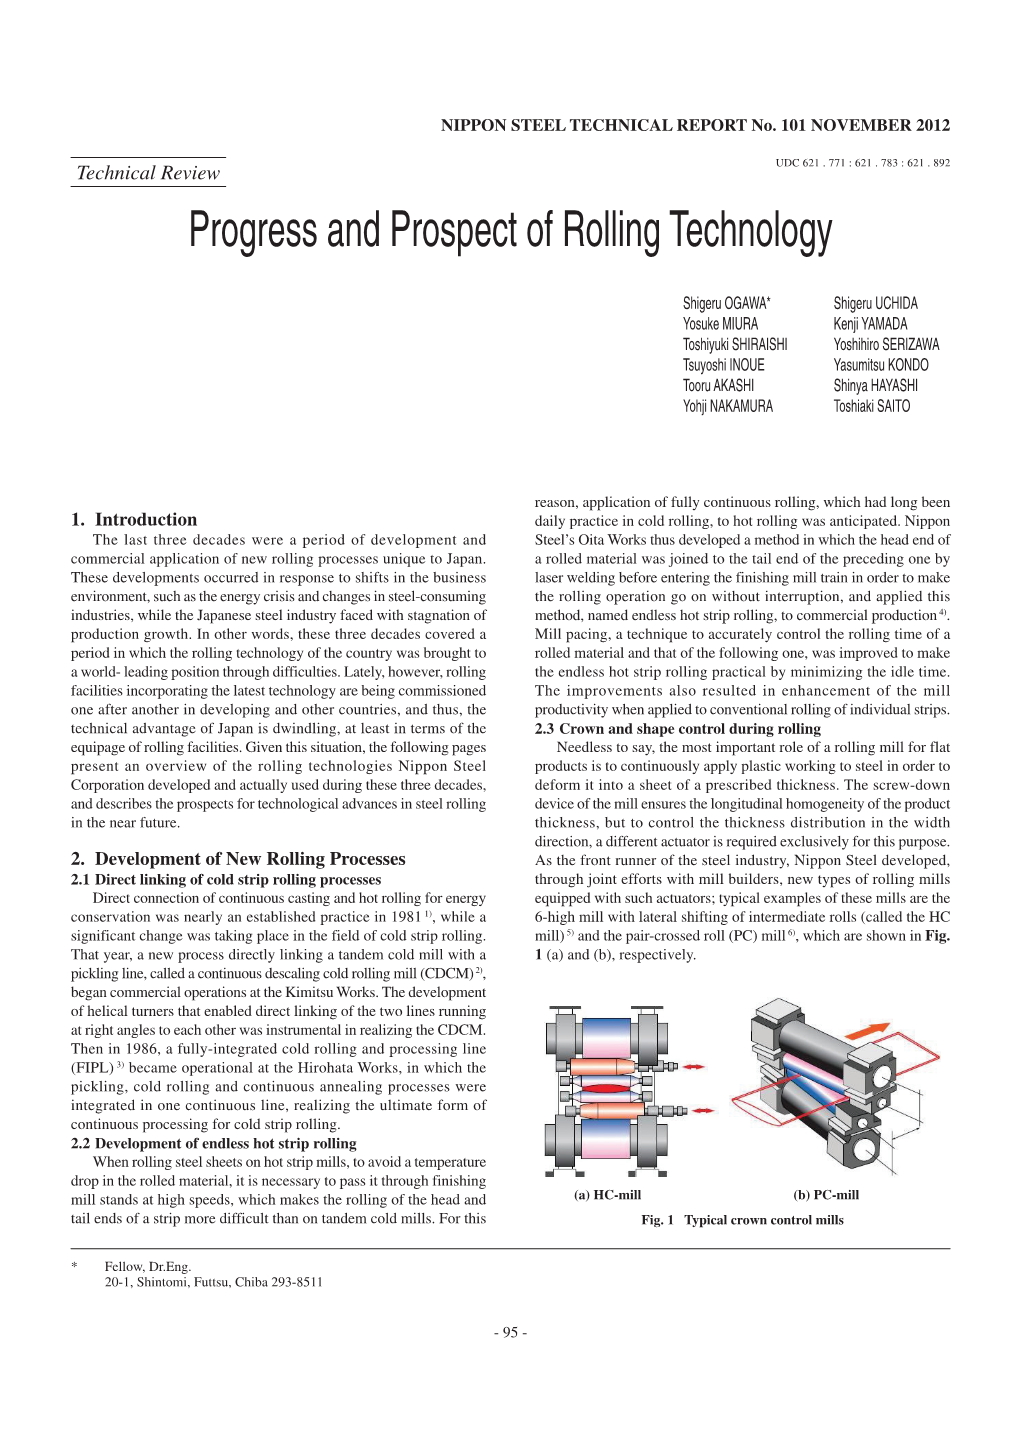 Progress and Prospect of Rolling Technology